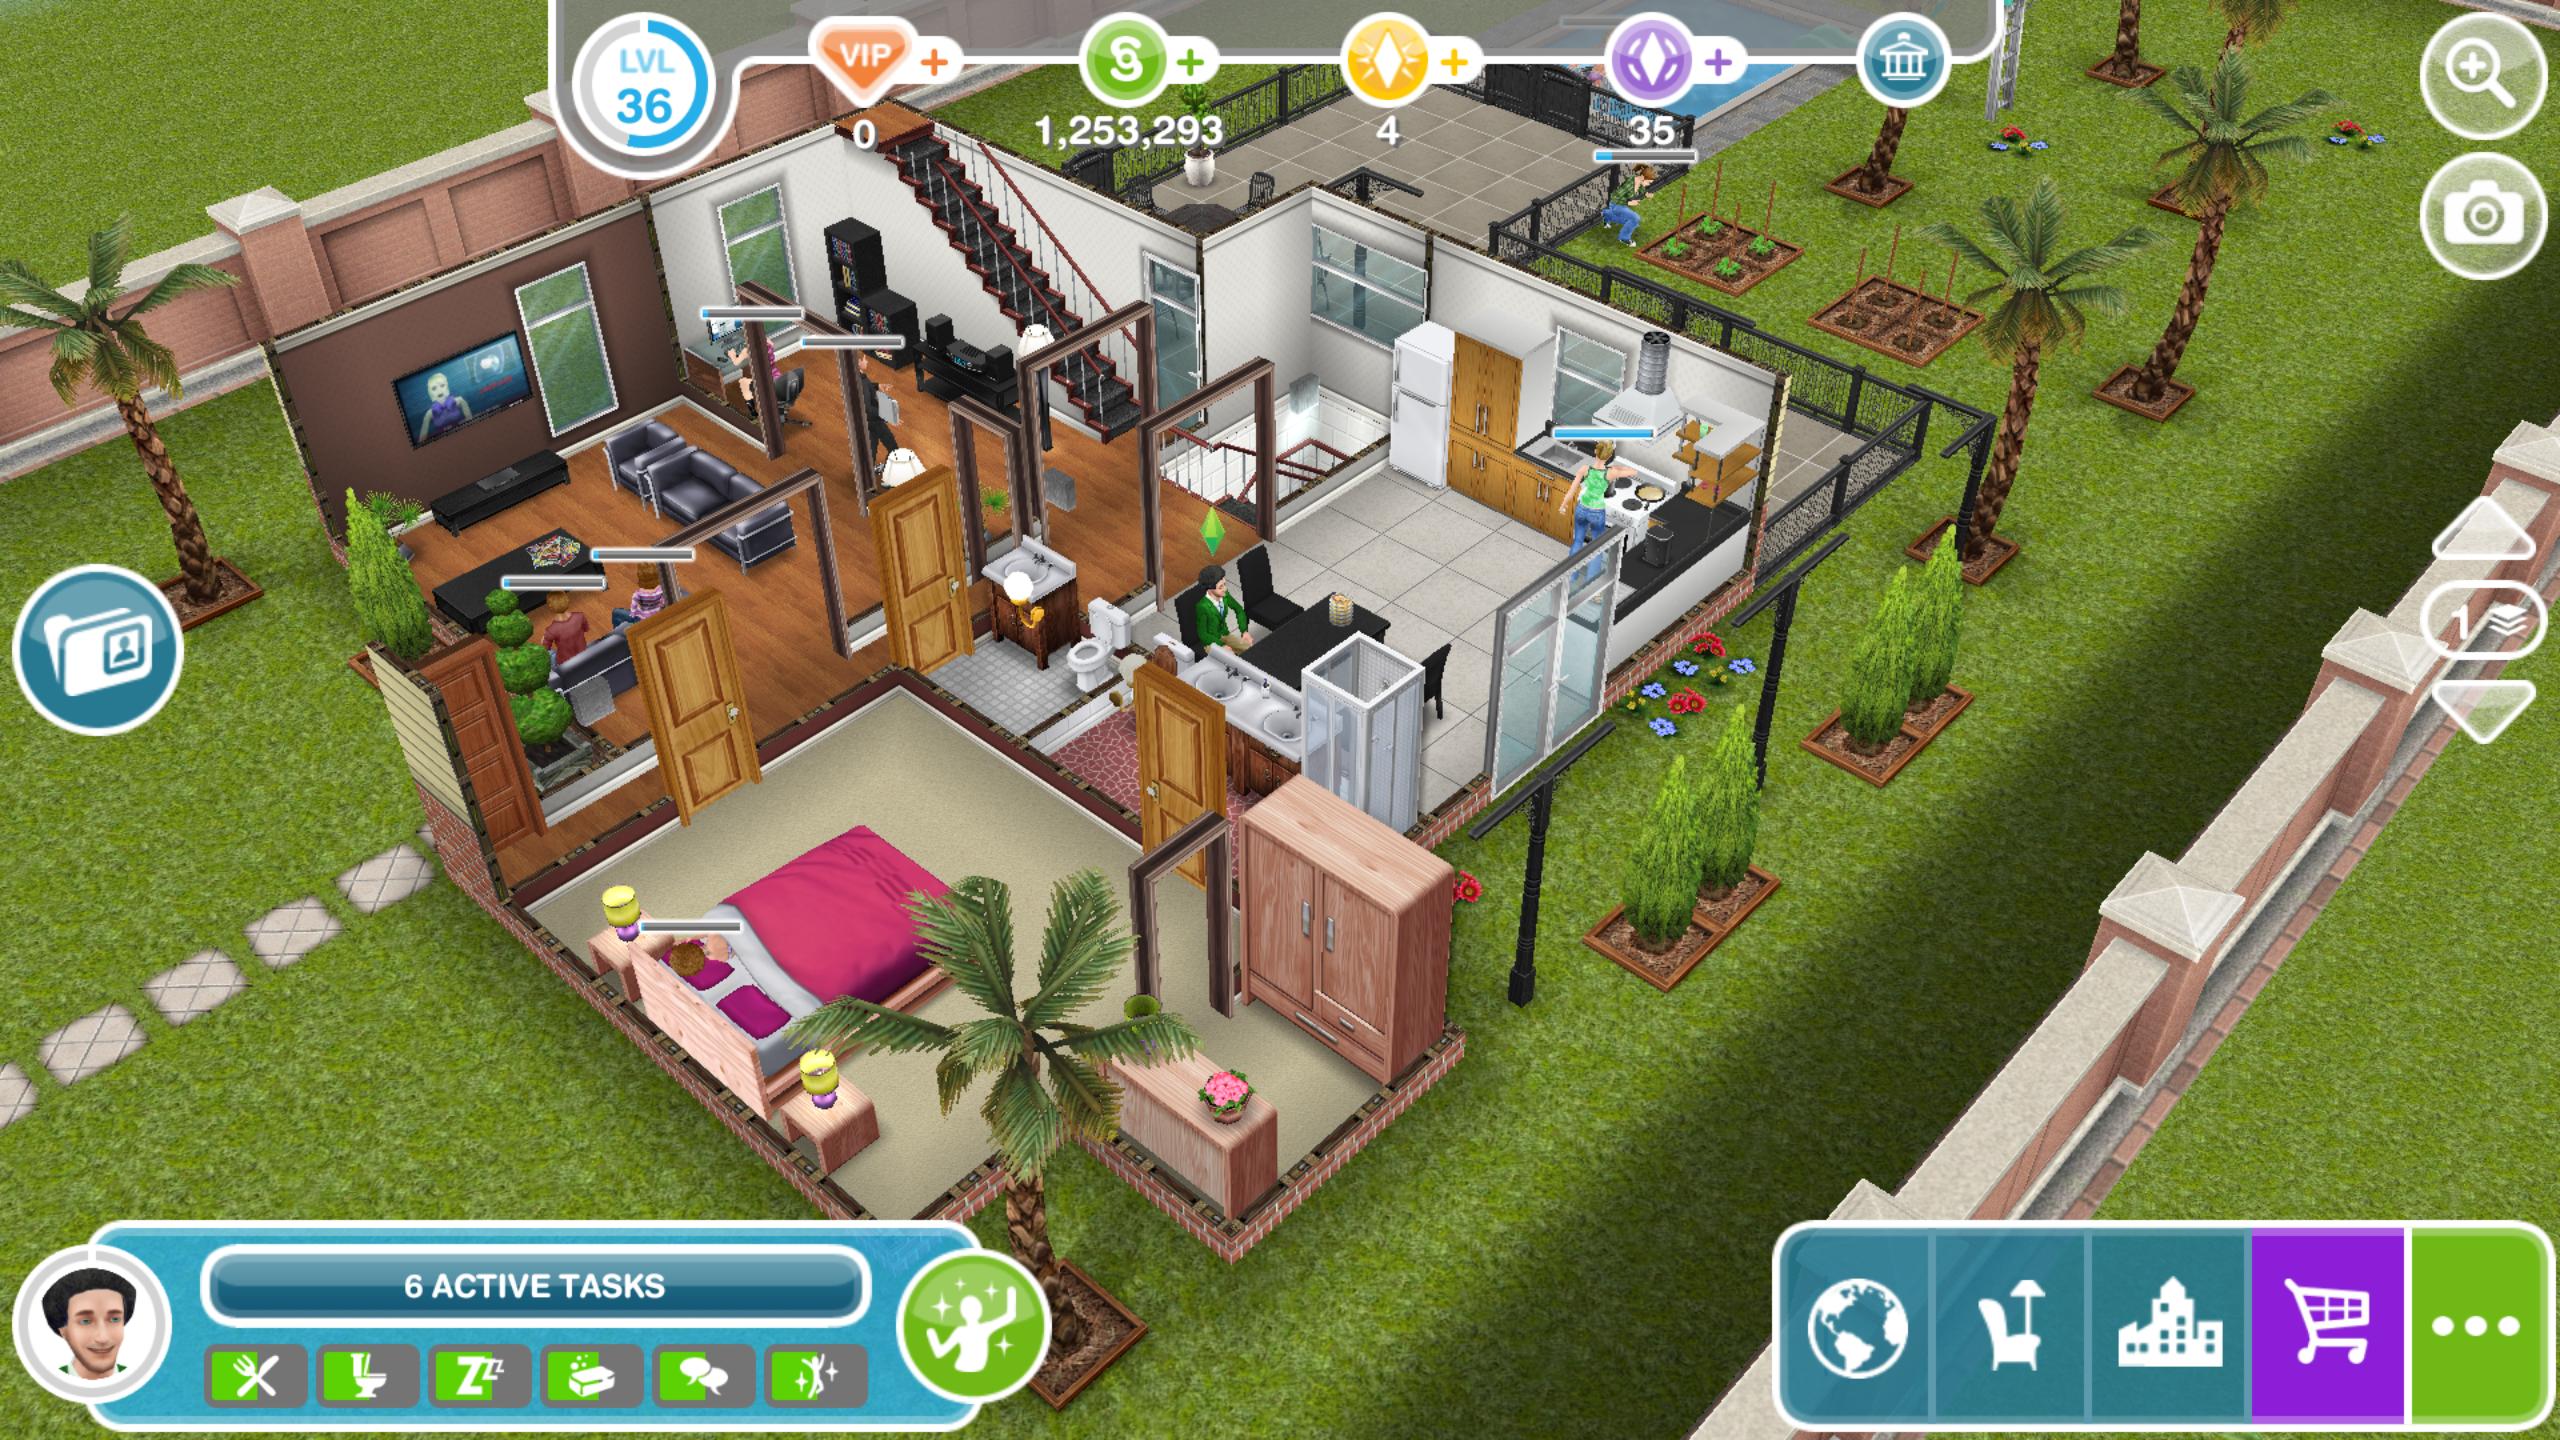 the sims free play sims freeplay online